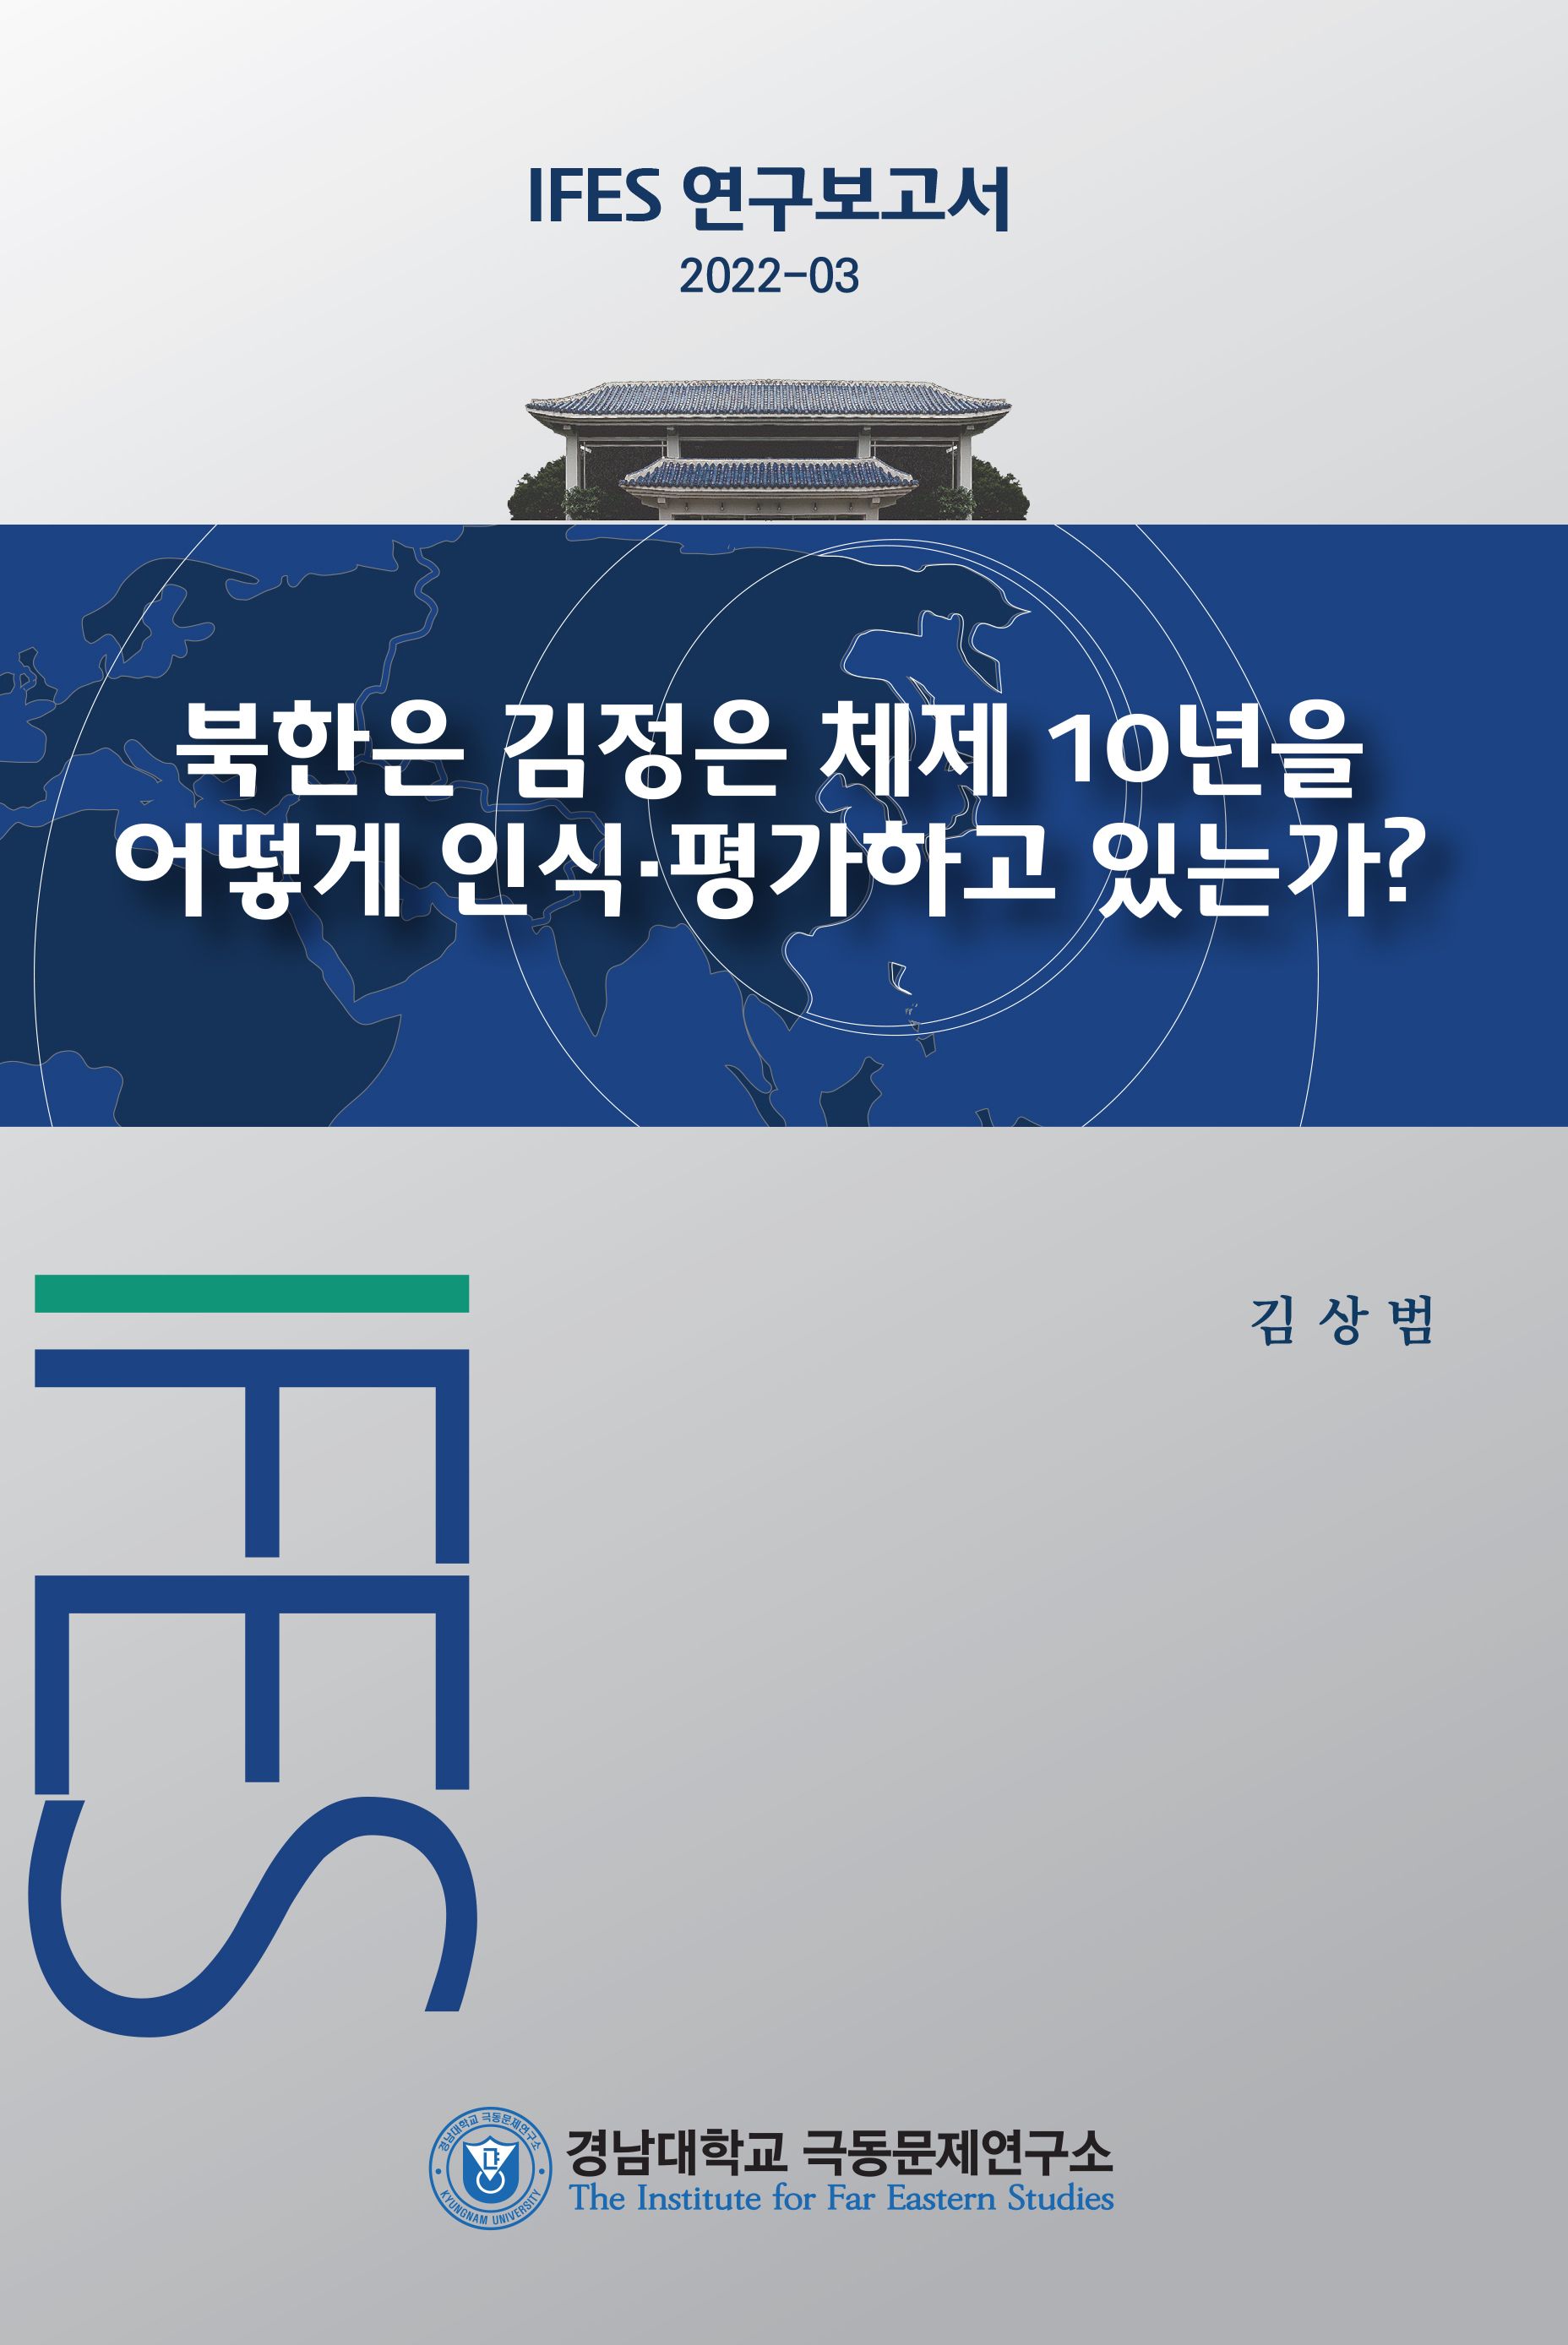 How does North Korea perceive and assess the decade of Kim Jong Un’s regime? 대표이미지